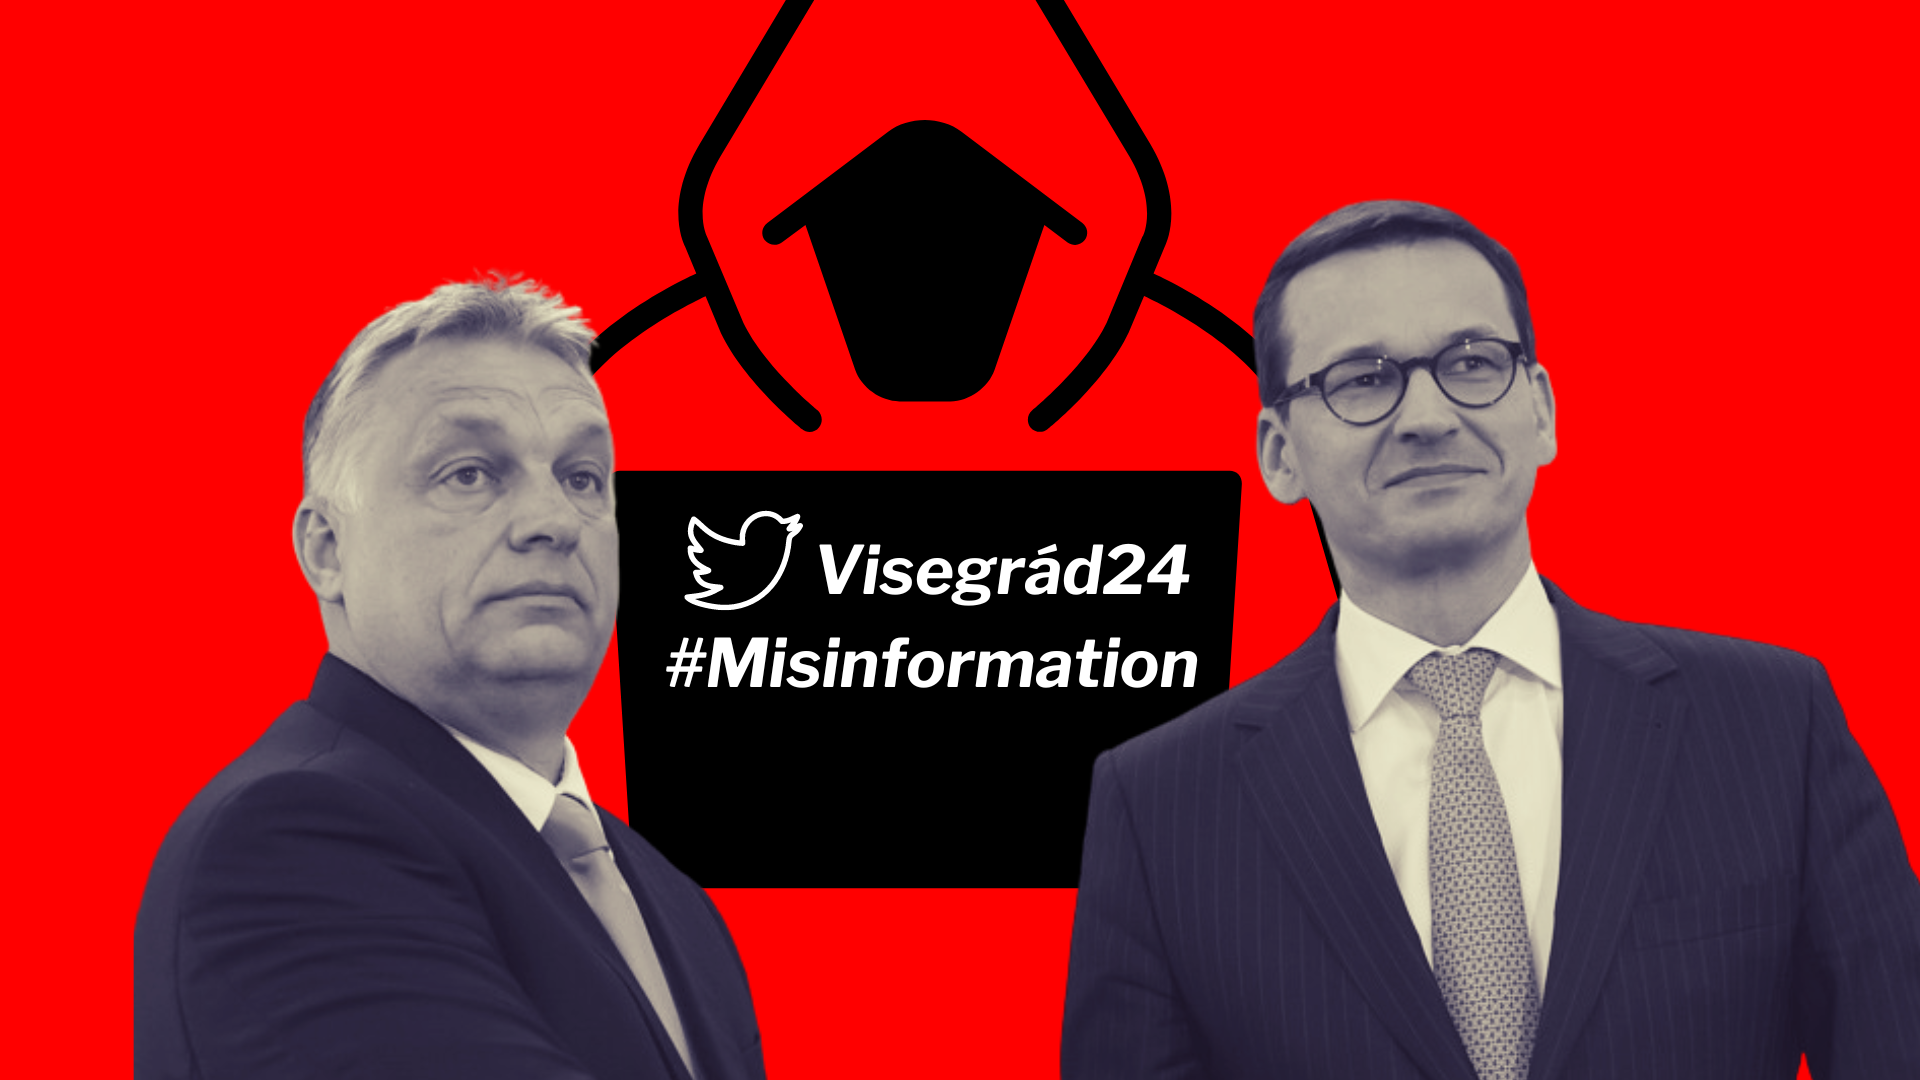 Polish Misinformation Using a Hungarian Recipe: The Curious Case of Visegrád 24